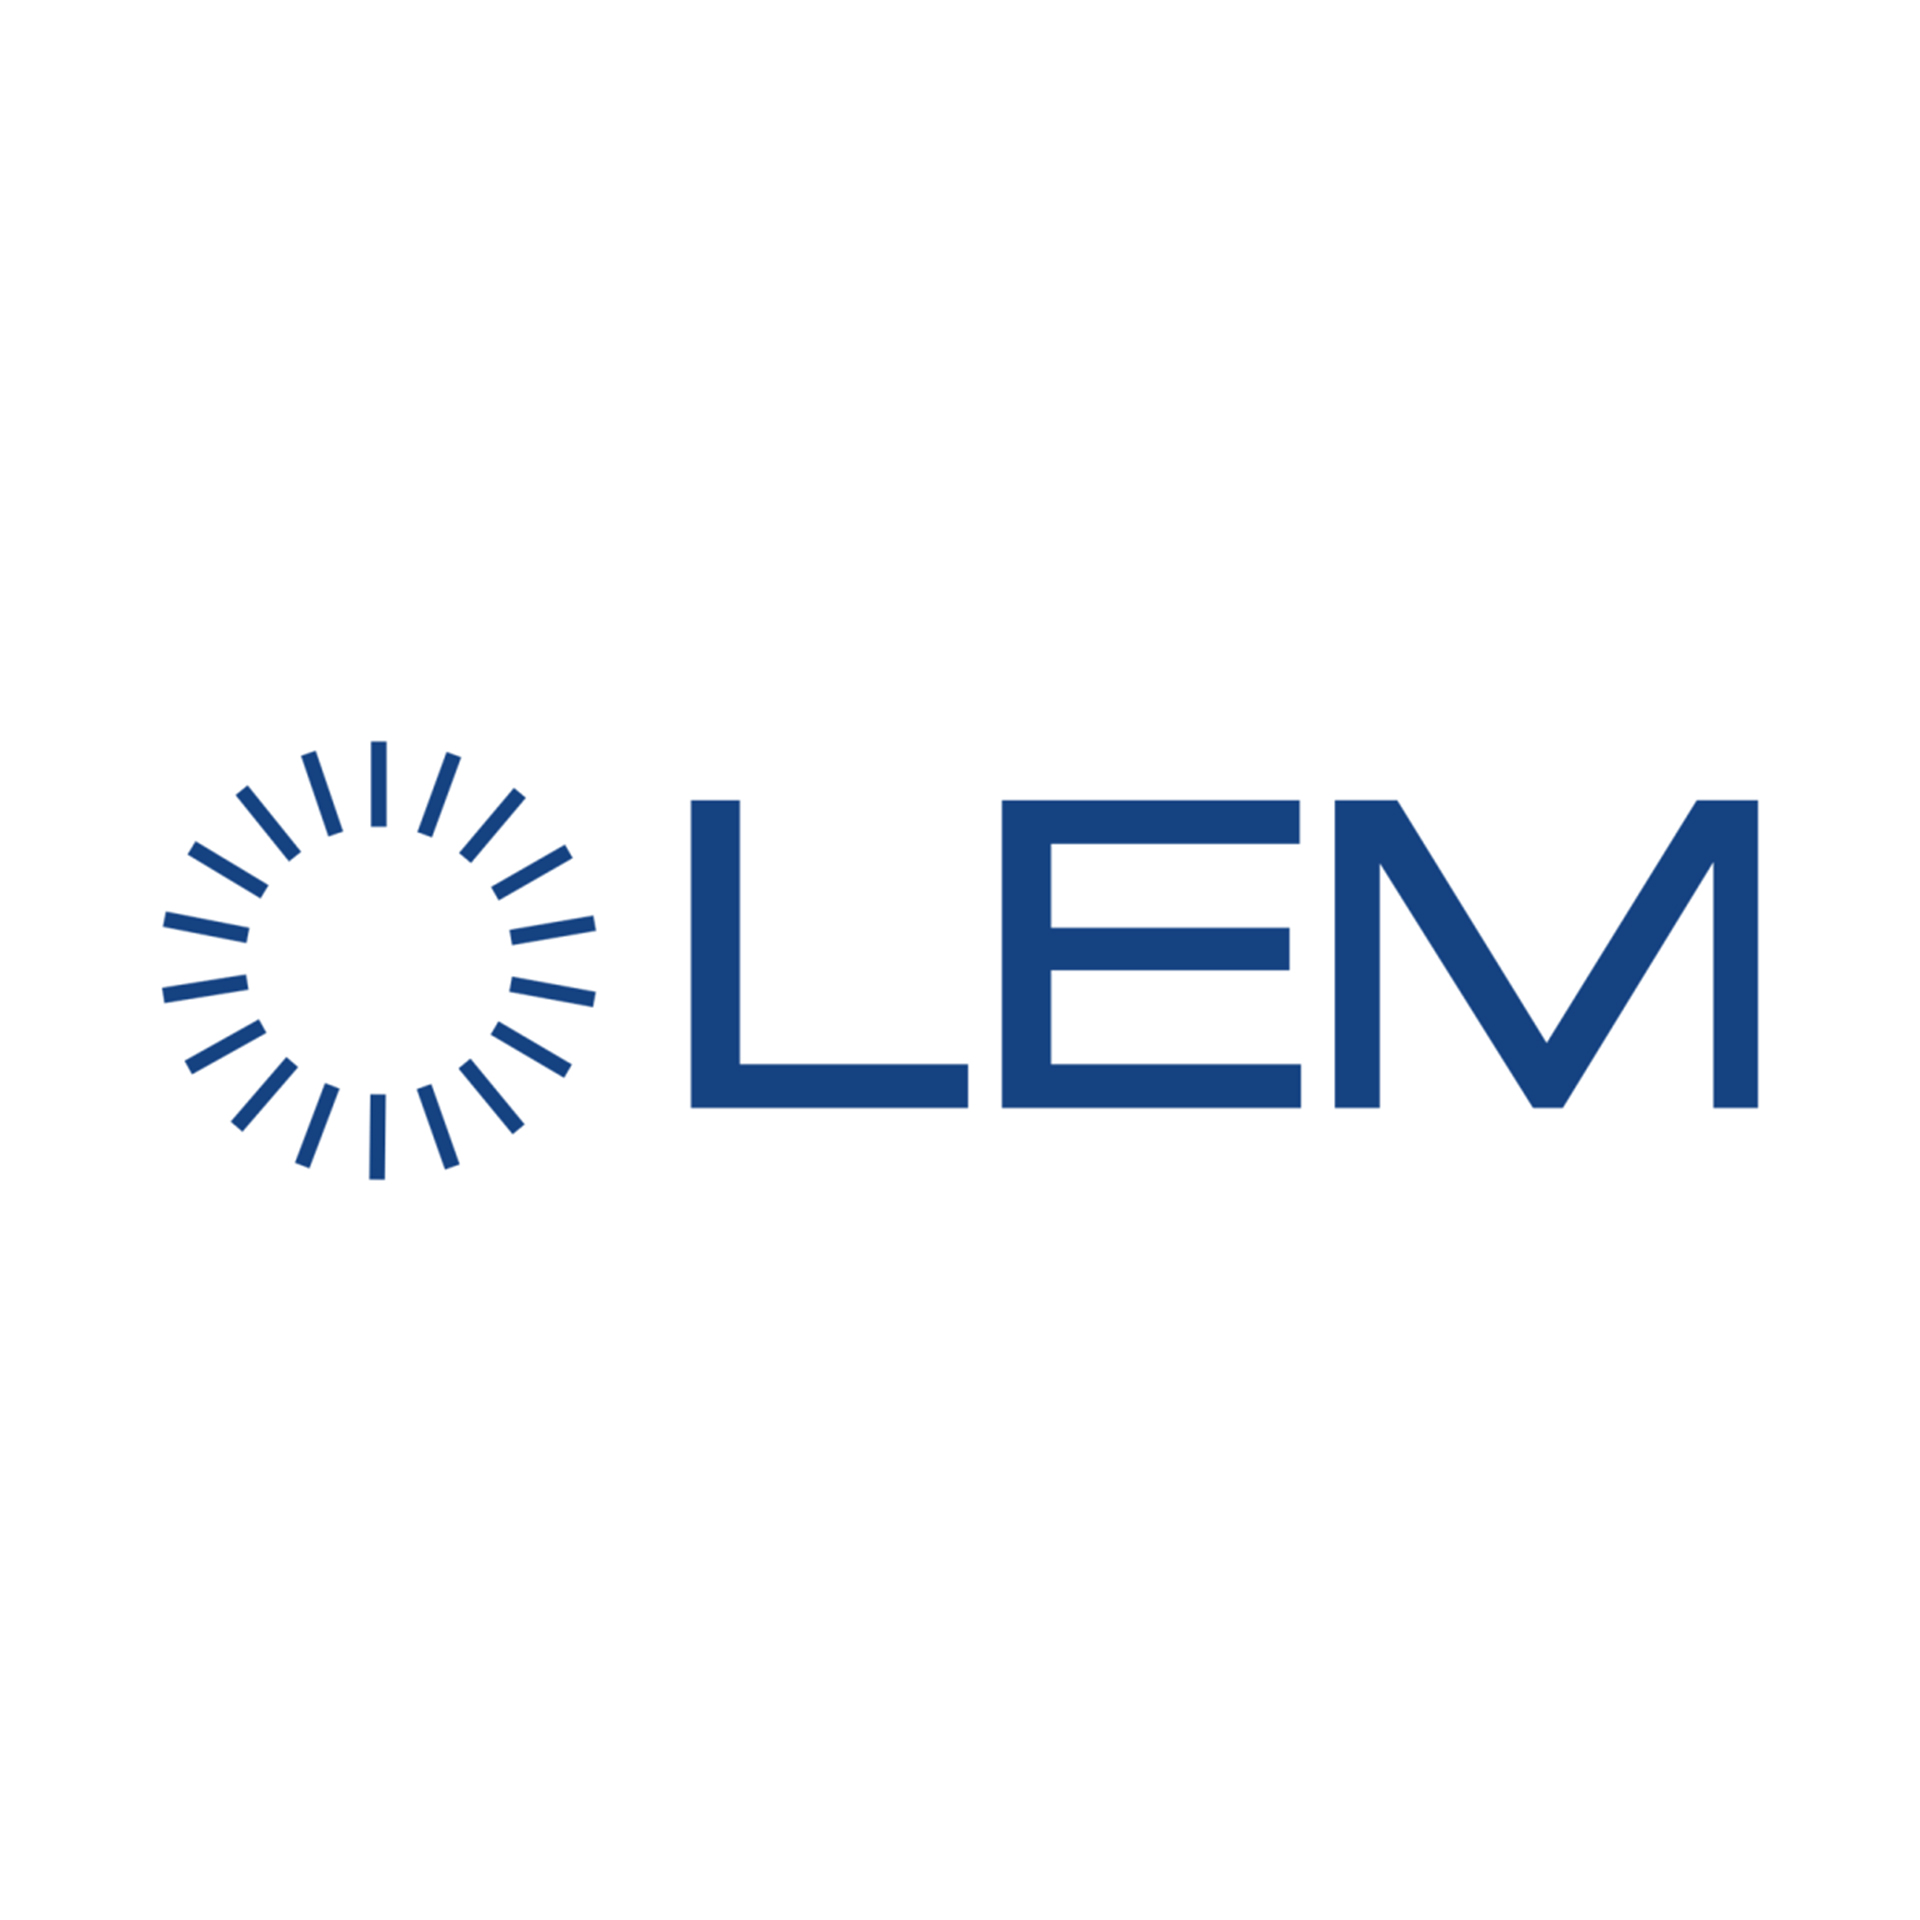 See the LEM Switzerland boosts its tech expertise in Lyon success story